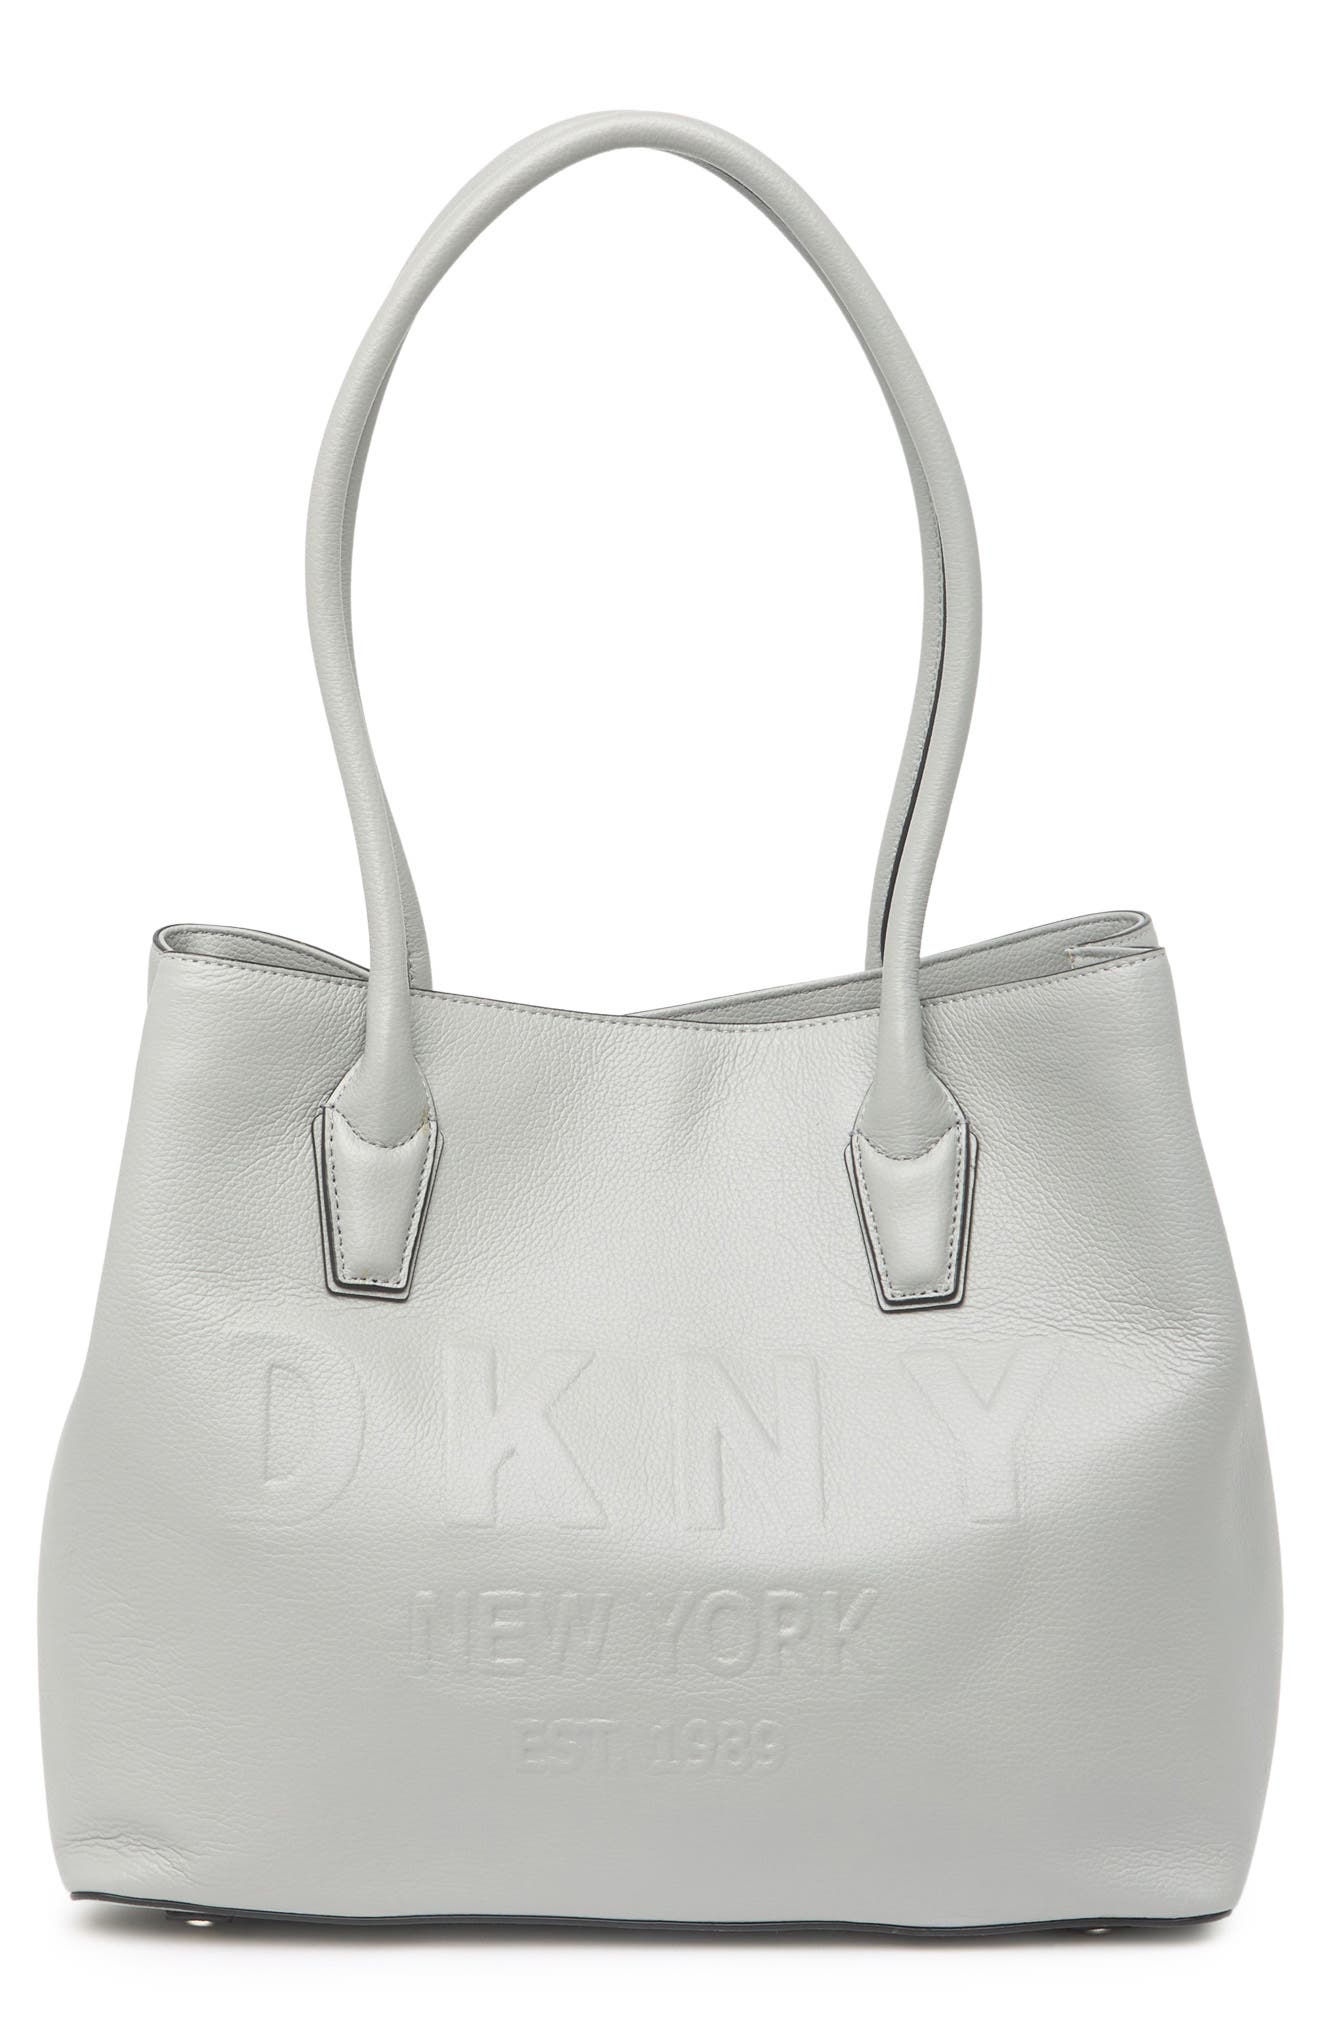 Dkny Hutton Leather Tote Bag In Grey Melan